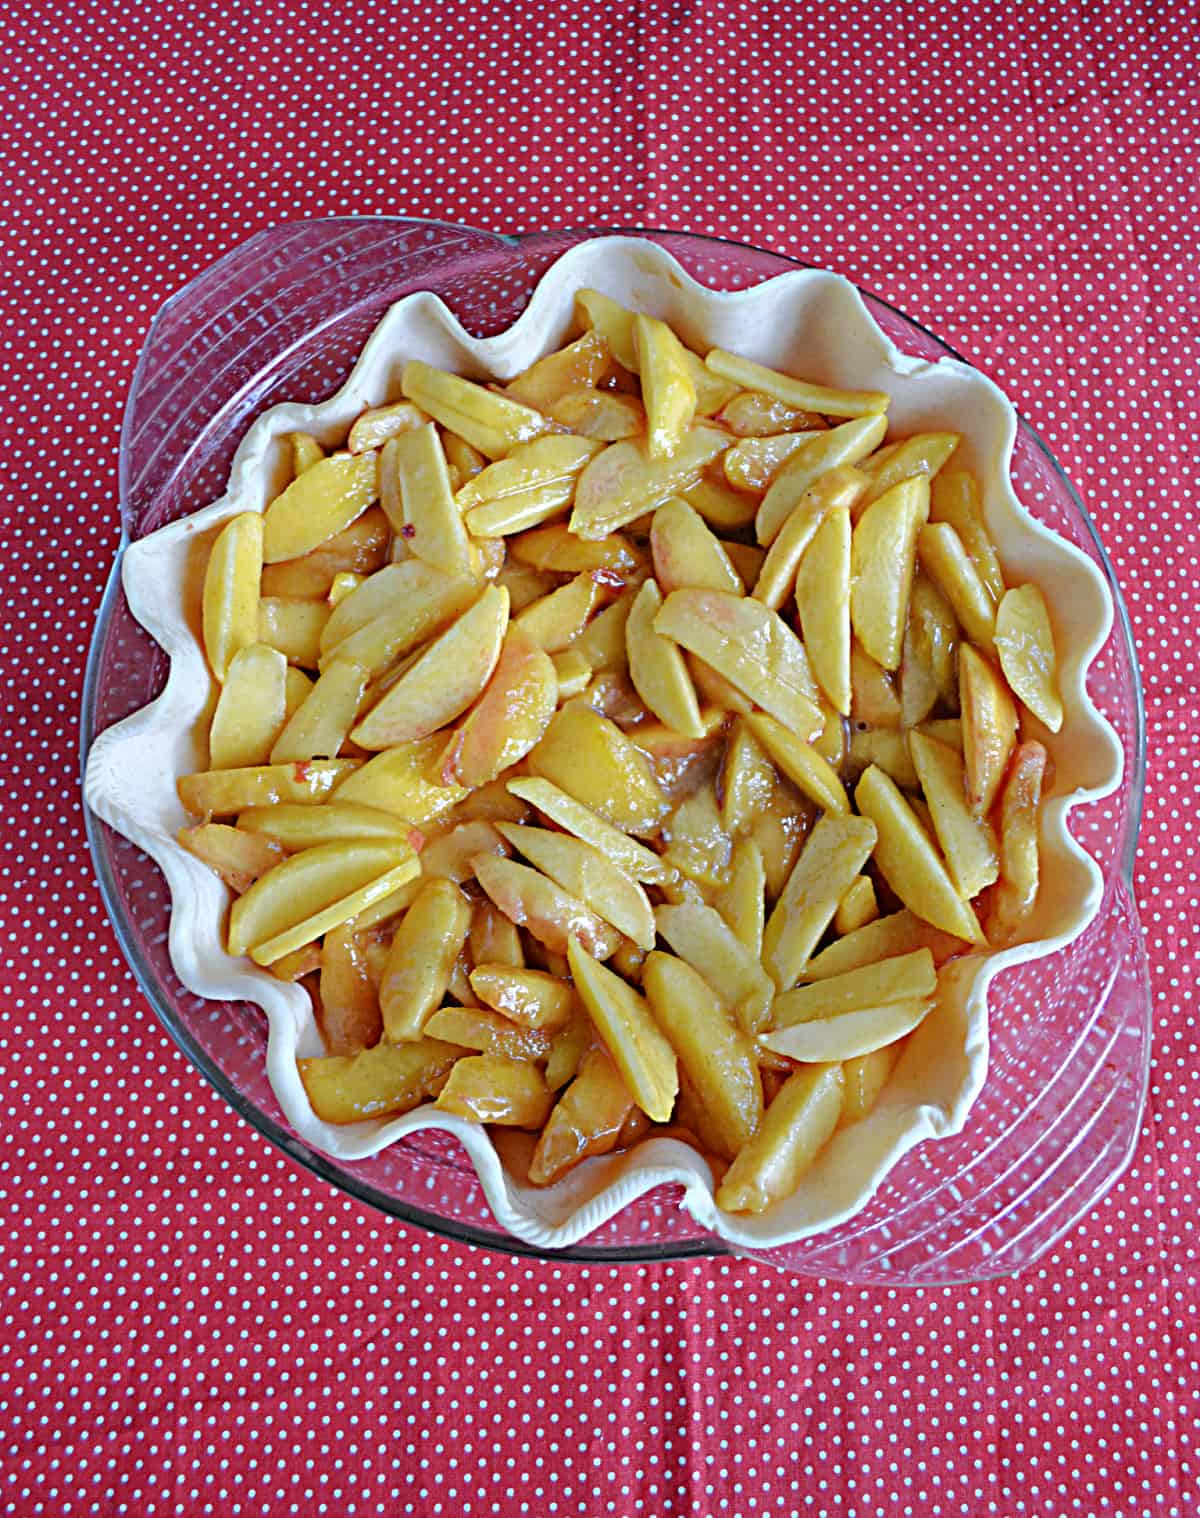 An unbaked pie crust filled with sliced peaches.